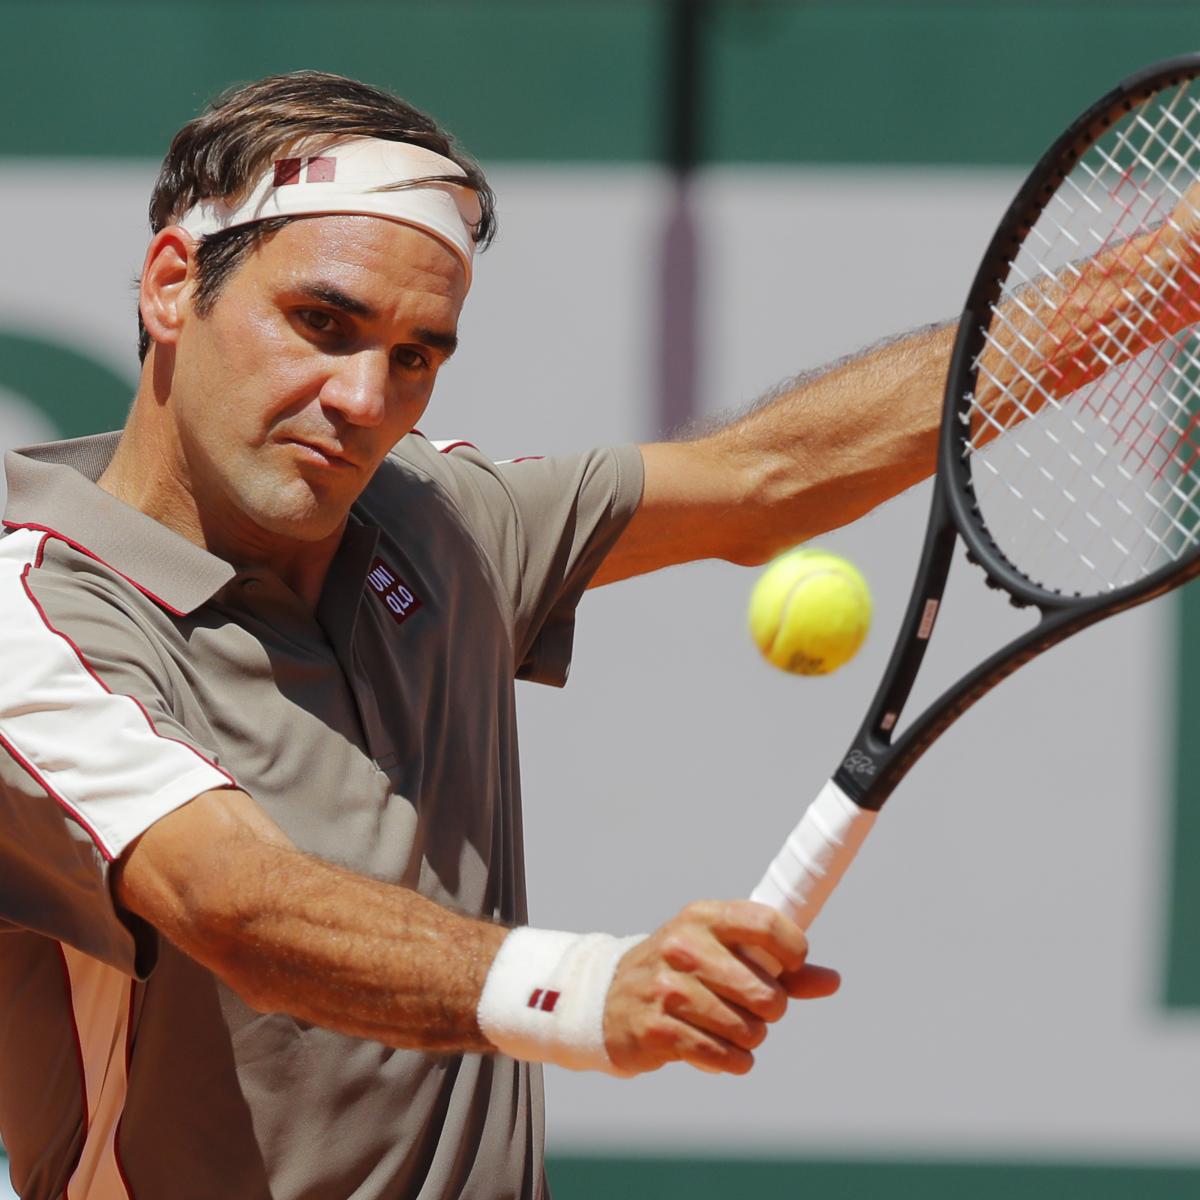 French Open 2019 Sunday Replay TV Schedule and LiveStream Guide